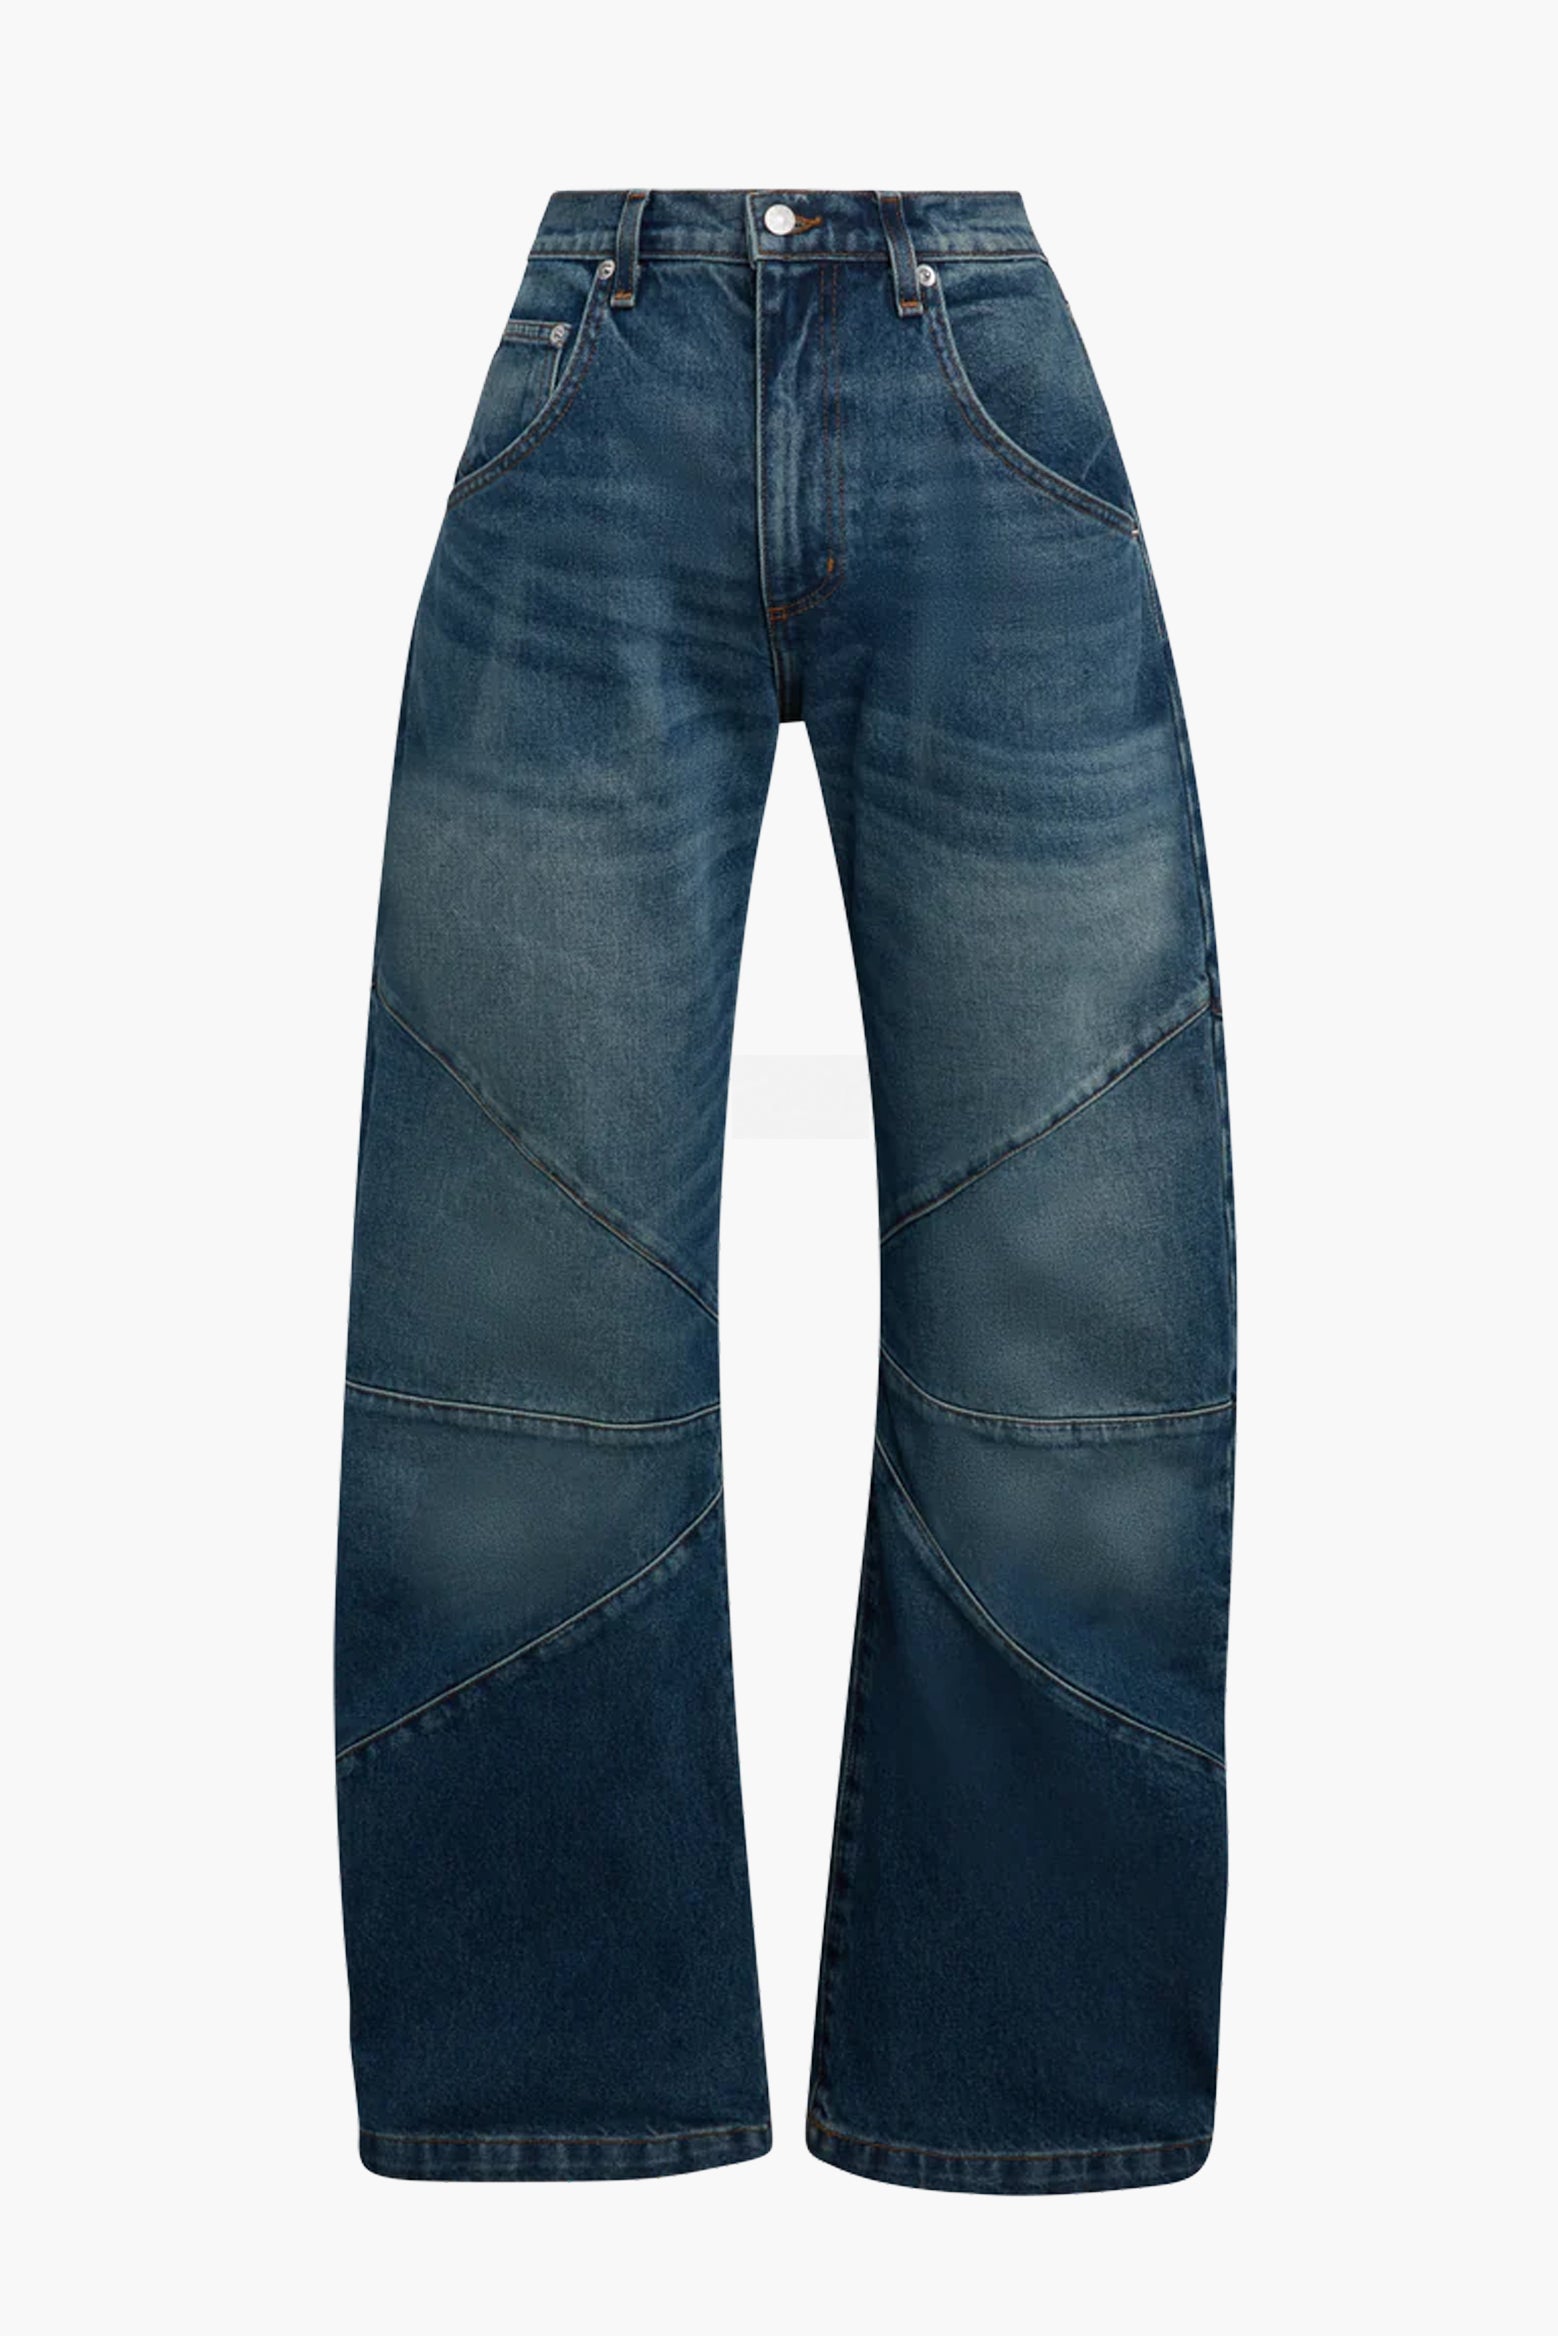 EB Denim Frederic Jean in Blue Denim available at The New Trend Australia. 